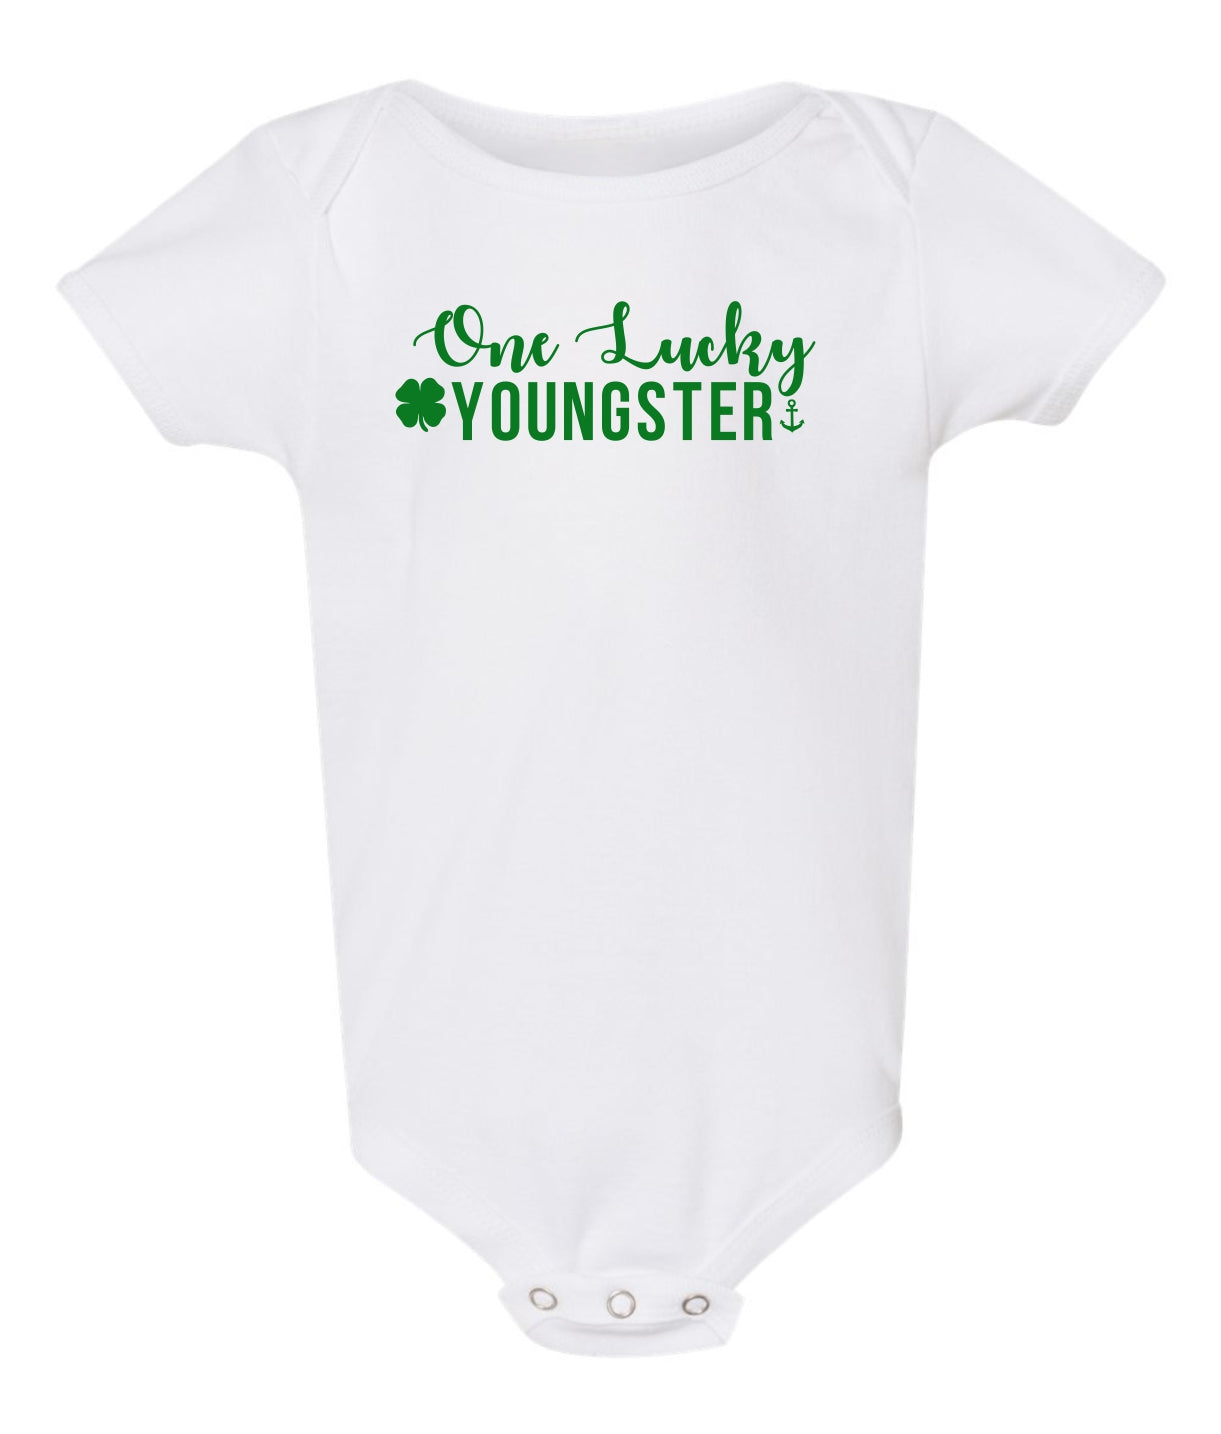 "One Lucky Youngster" Onesie